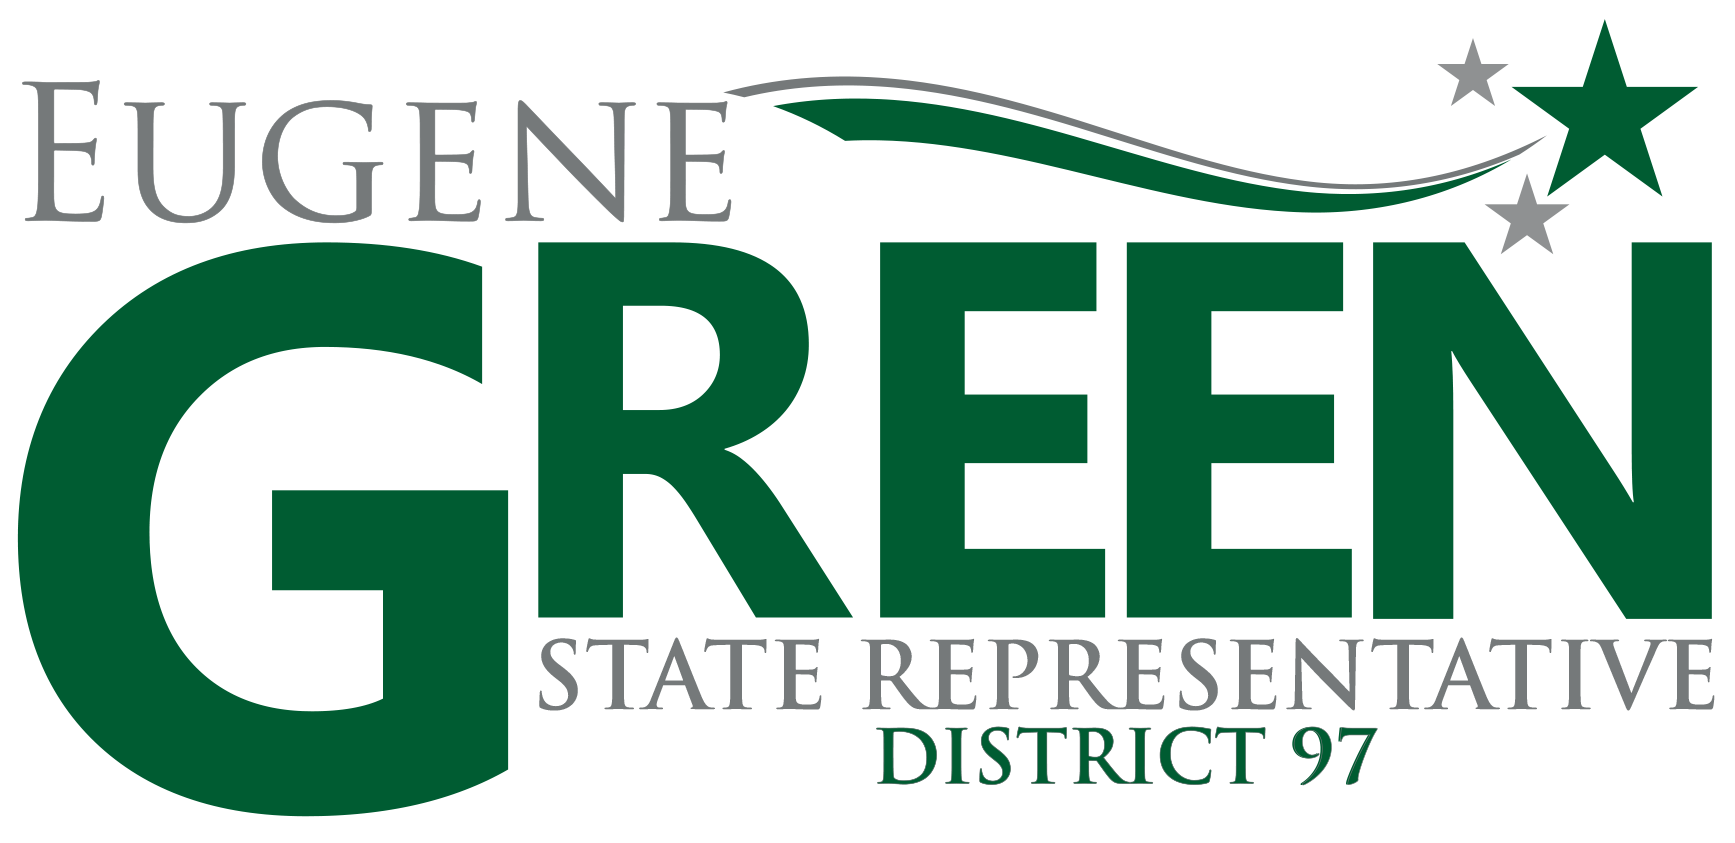 EUGENE GREEN CAMPAIGN